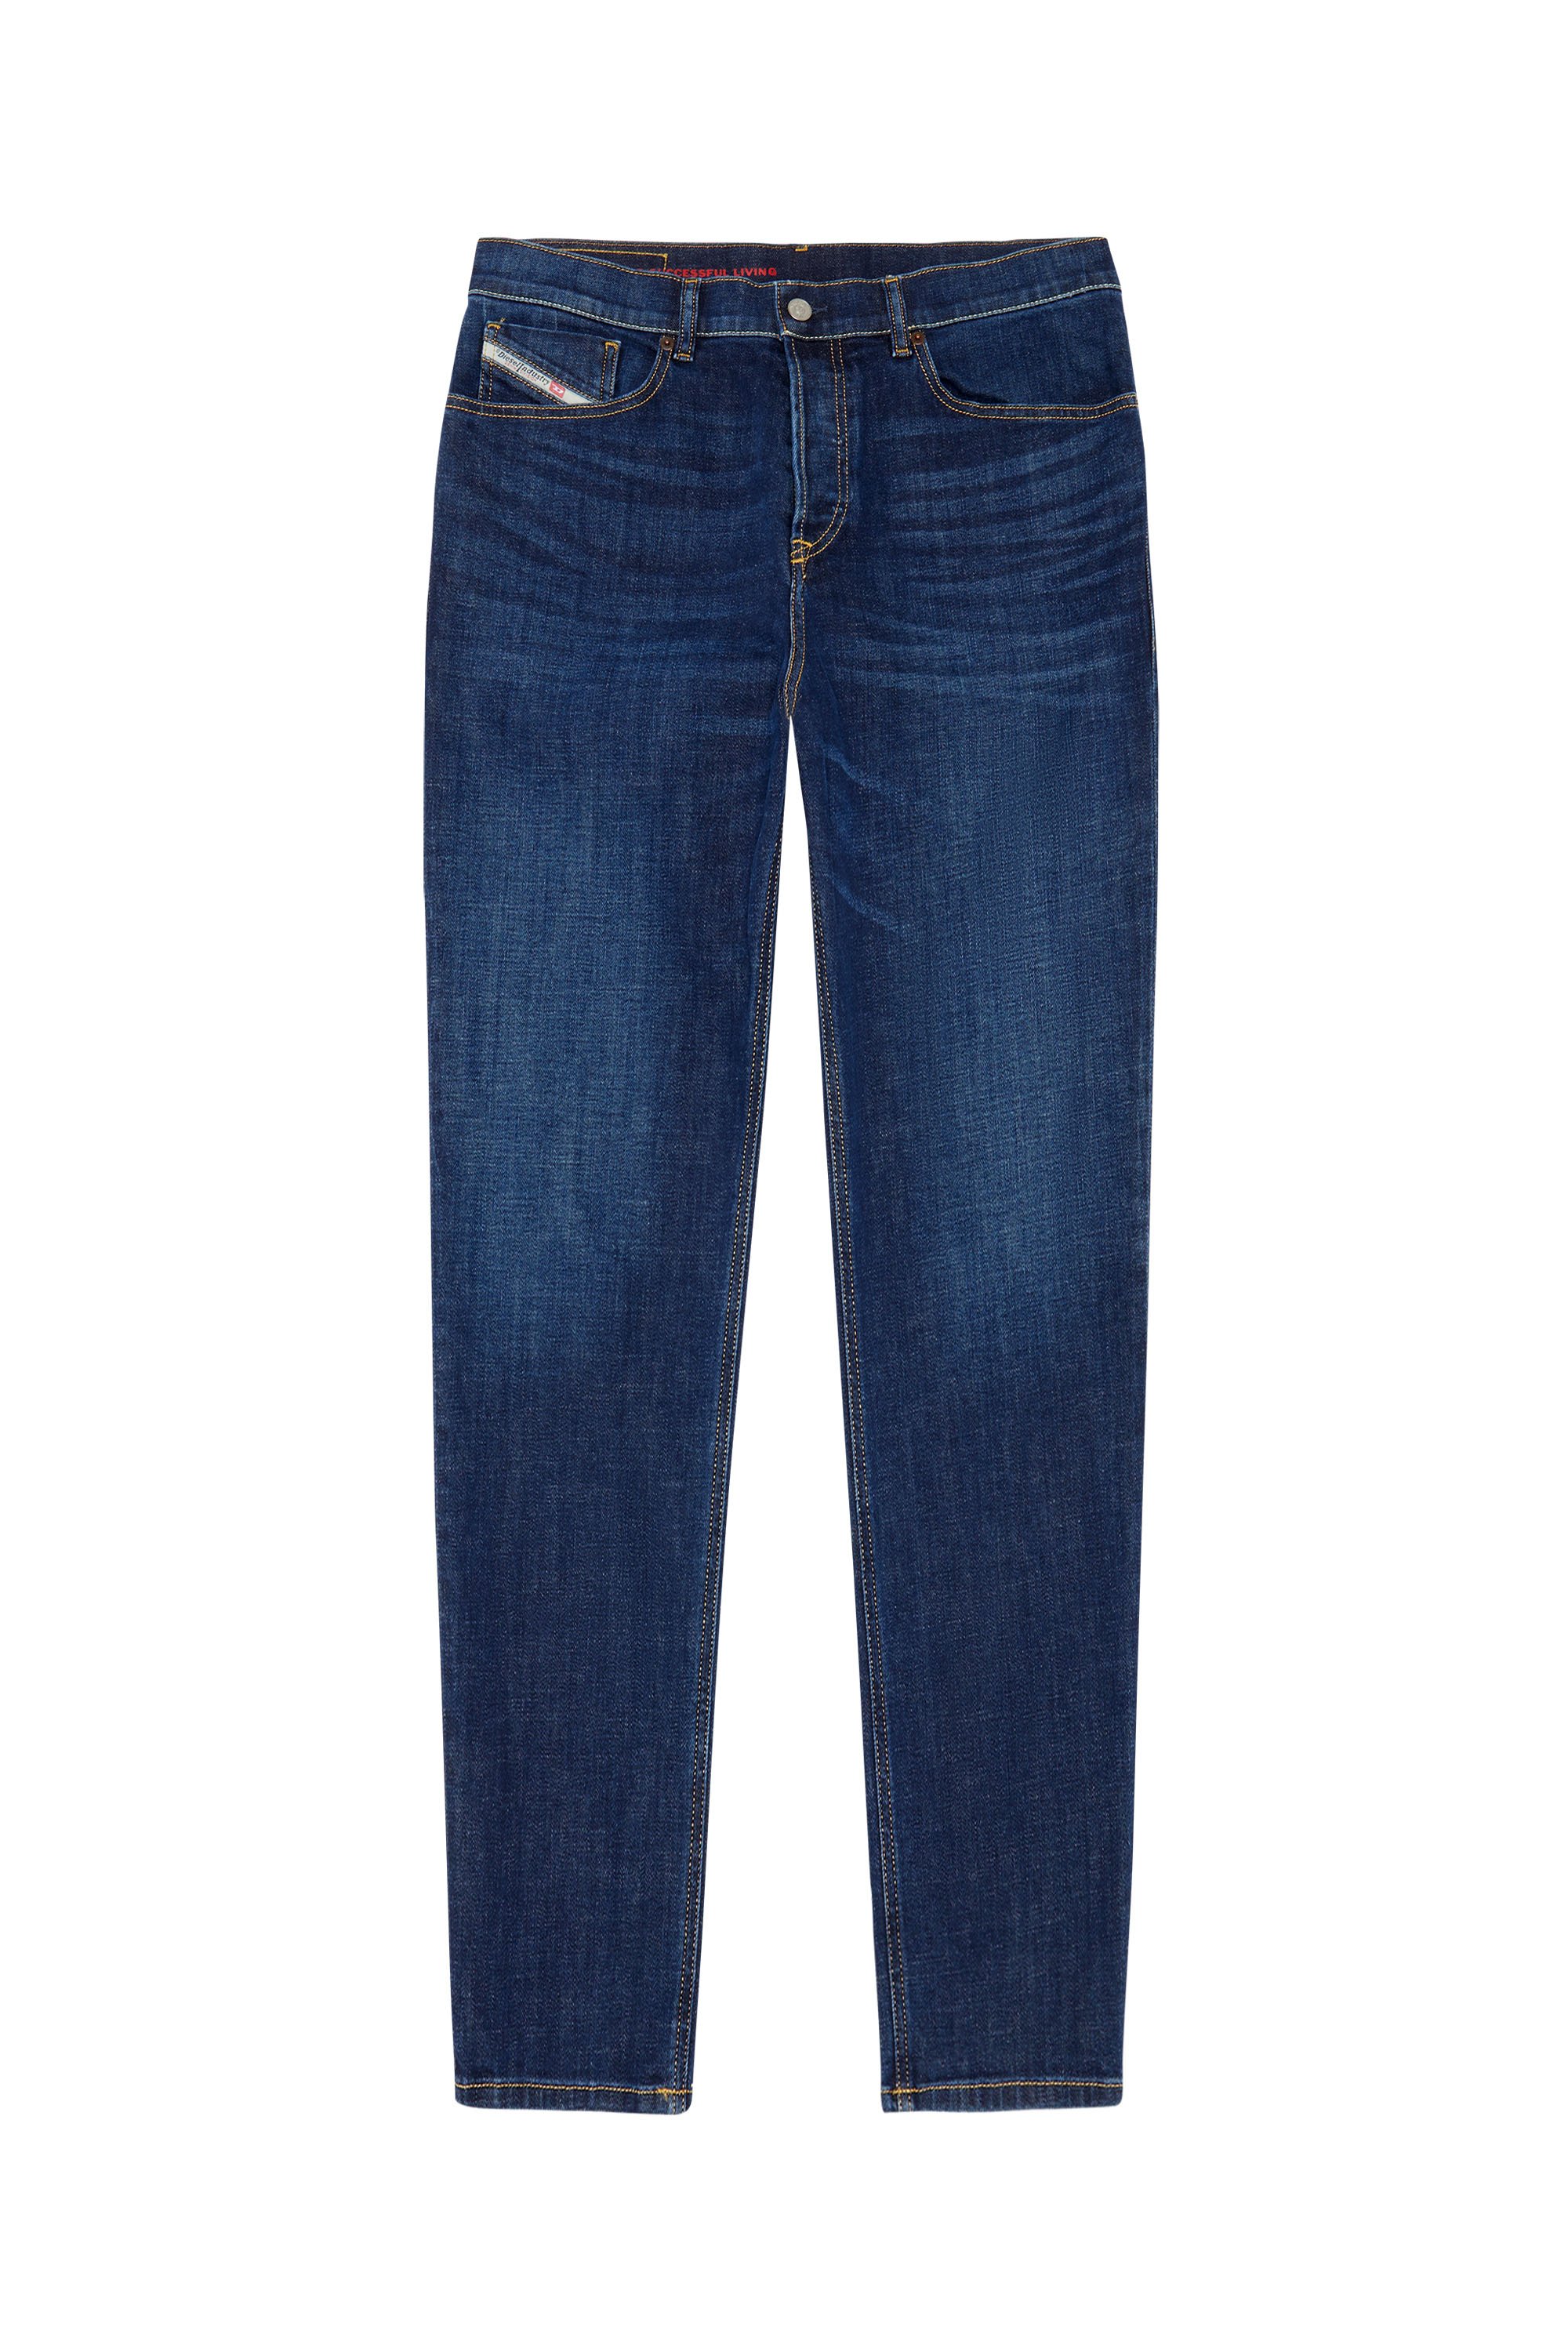 Tapered Jeans 2005 D-Fining 09B90, Blu Scuro - Jeans